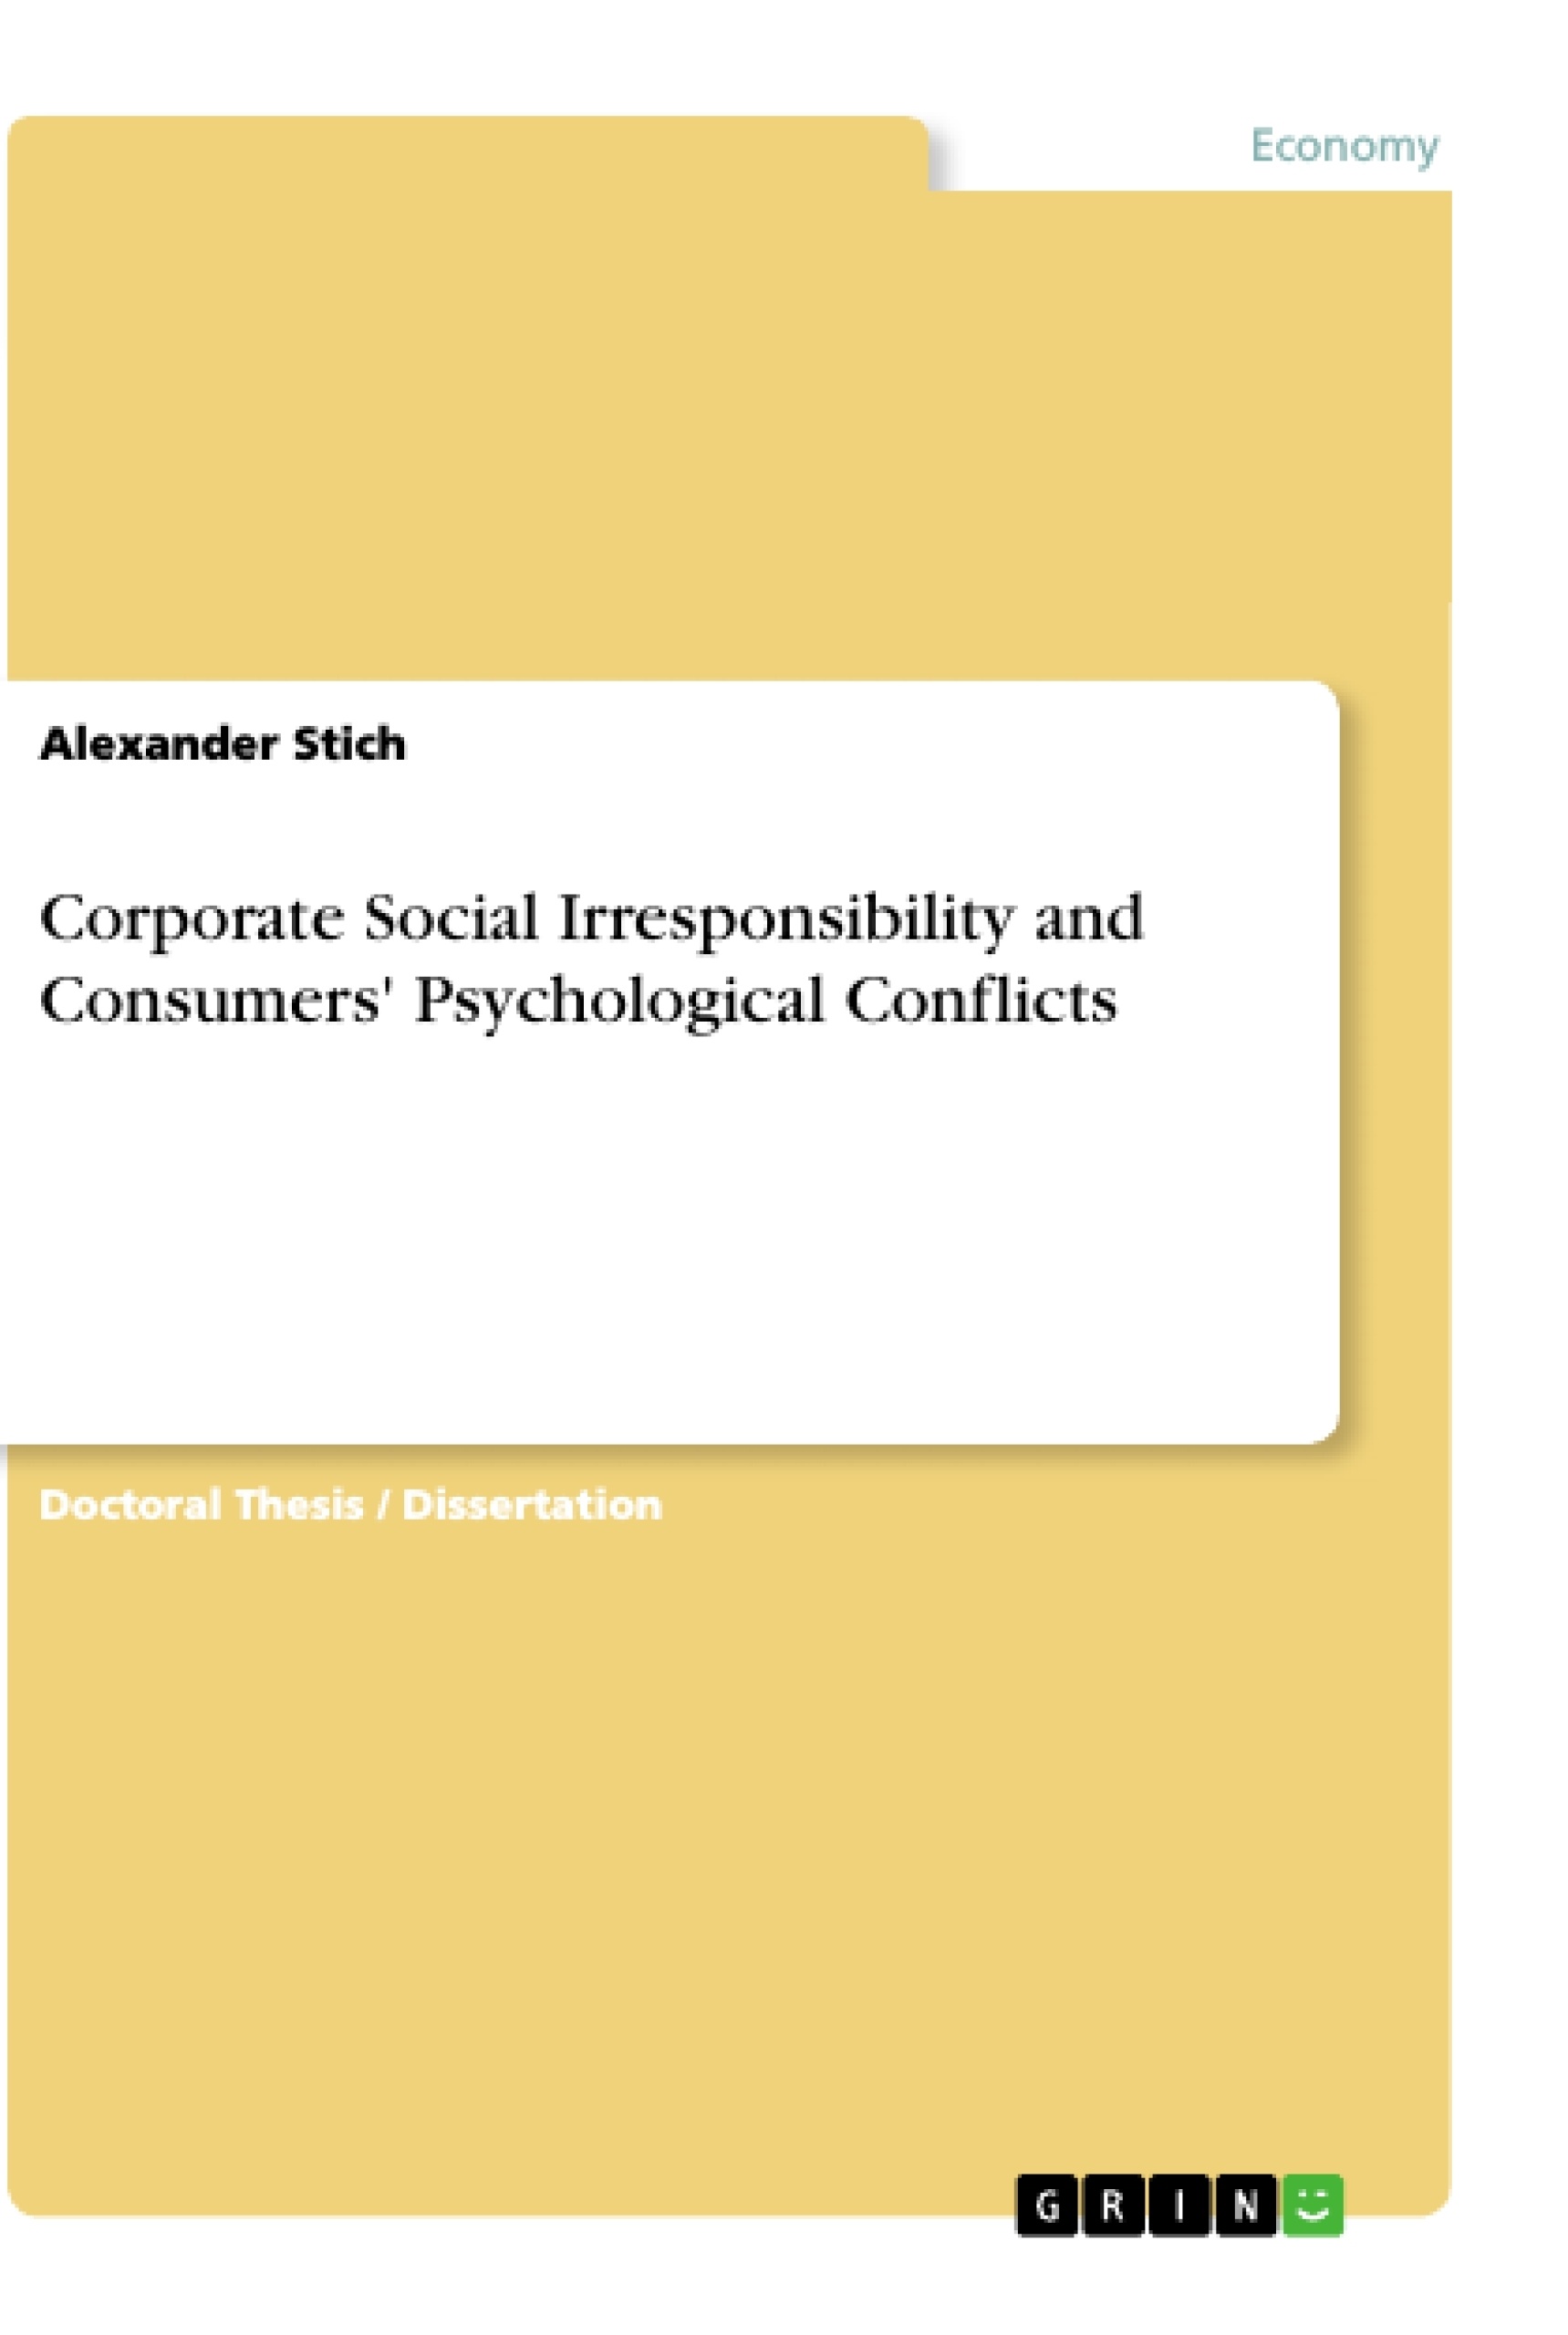 Titre: Corporate Social Irresponsibility and Consumers' Psychological Conflicts